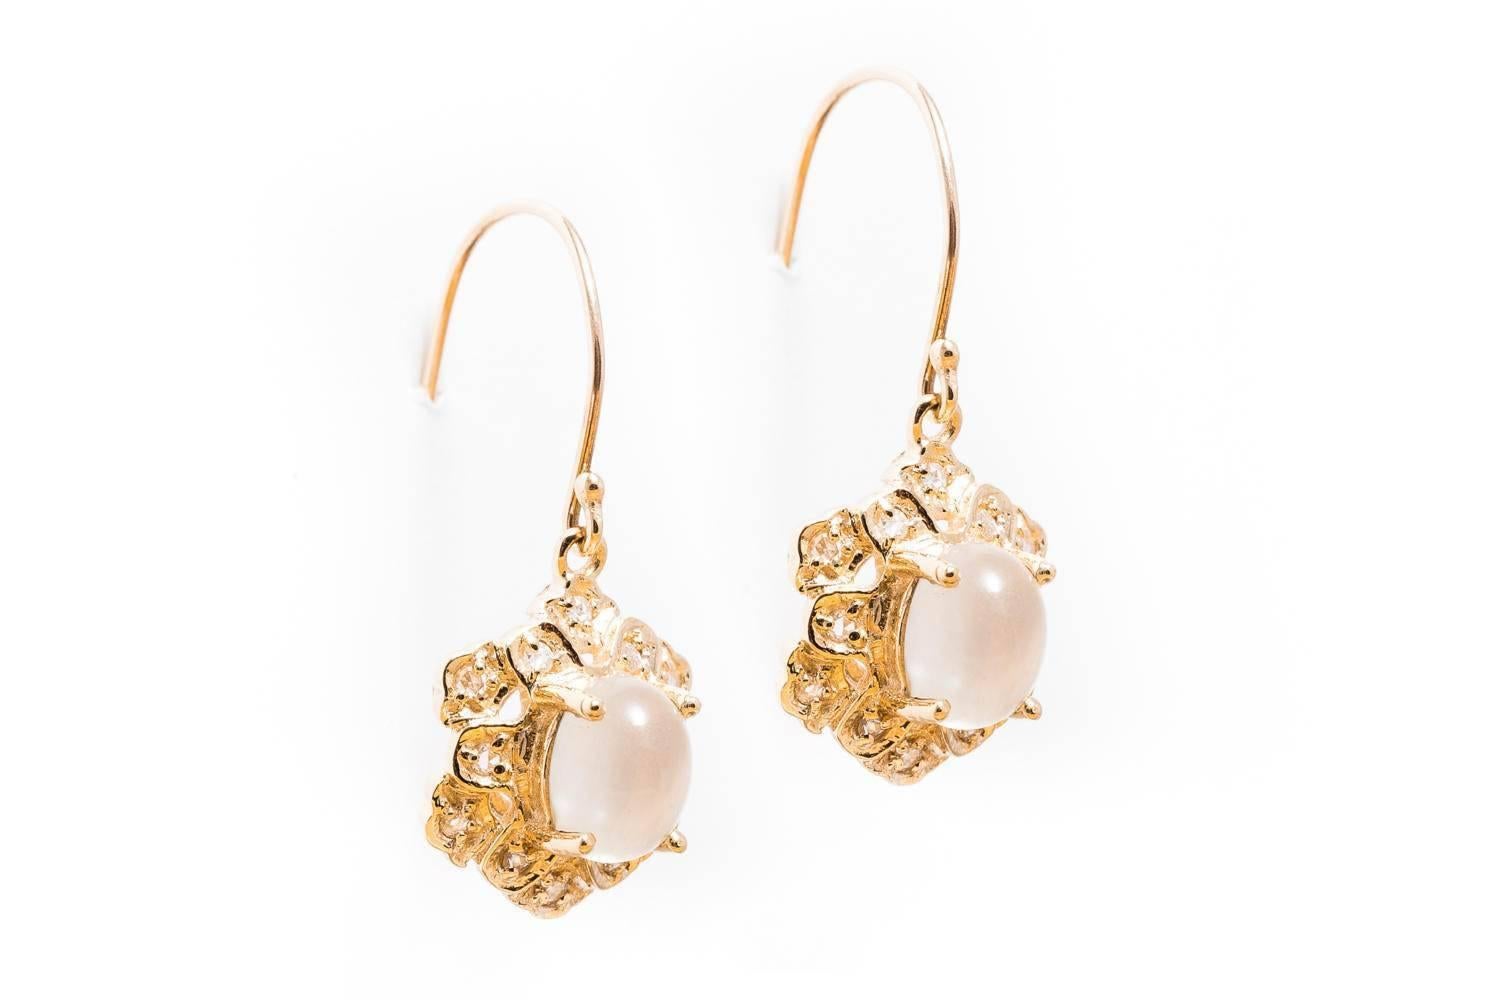 A beautiful pair of dangling diamond and moonstone earrings in 9 carat yellow gold. Centering these earrings are a pair of beautiful moonstones surrounded by sparkling antique rose cut diamonds.

Of beautiful quality, the inclusion free blue sheen